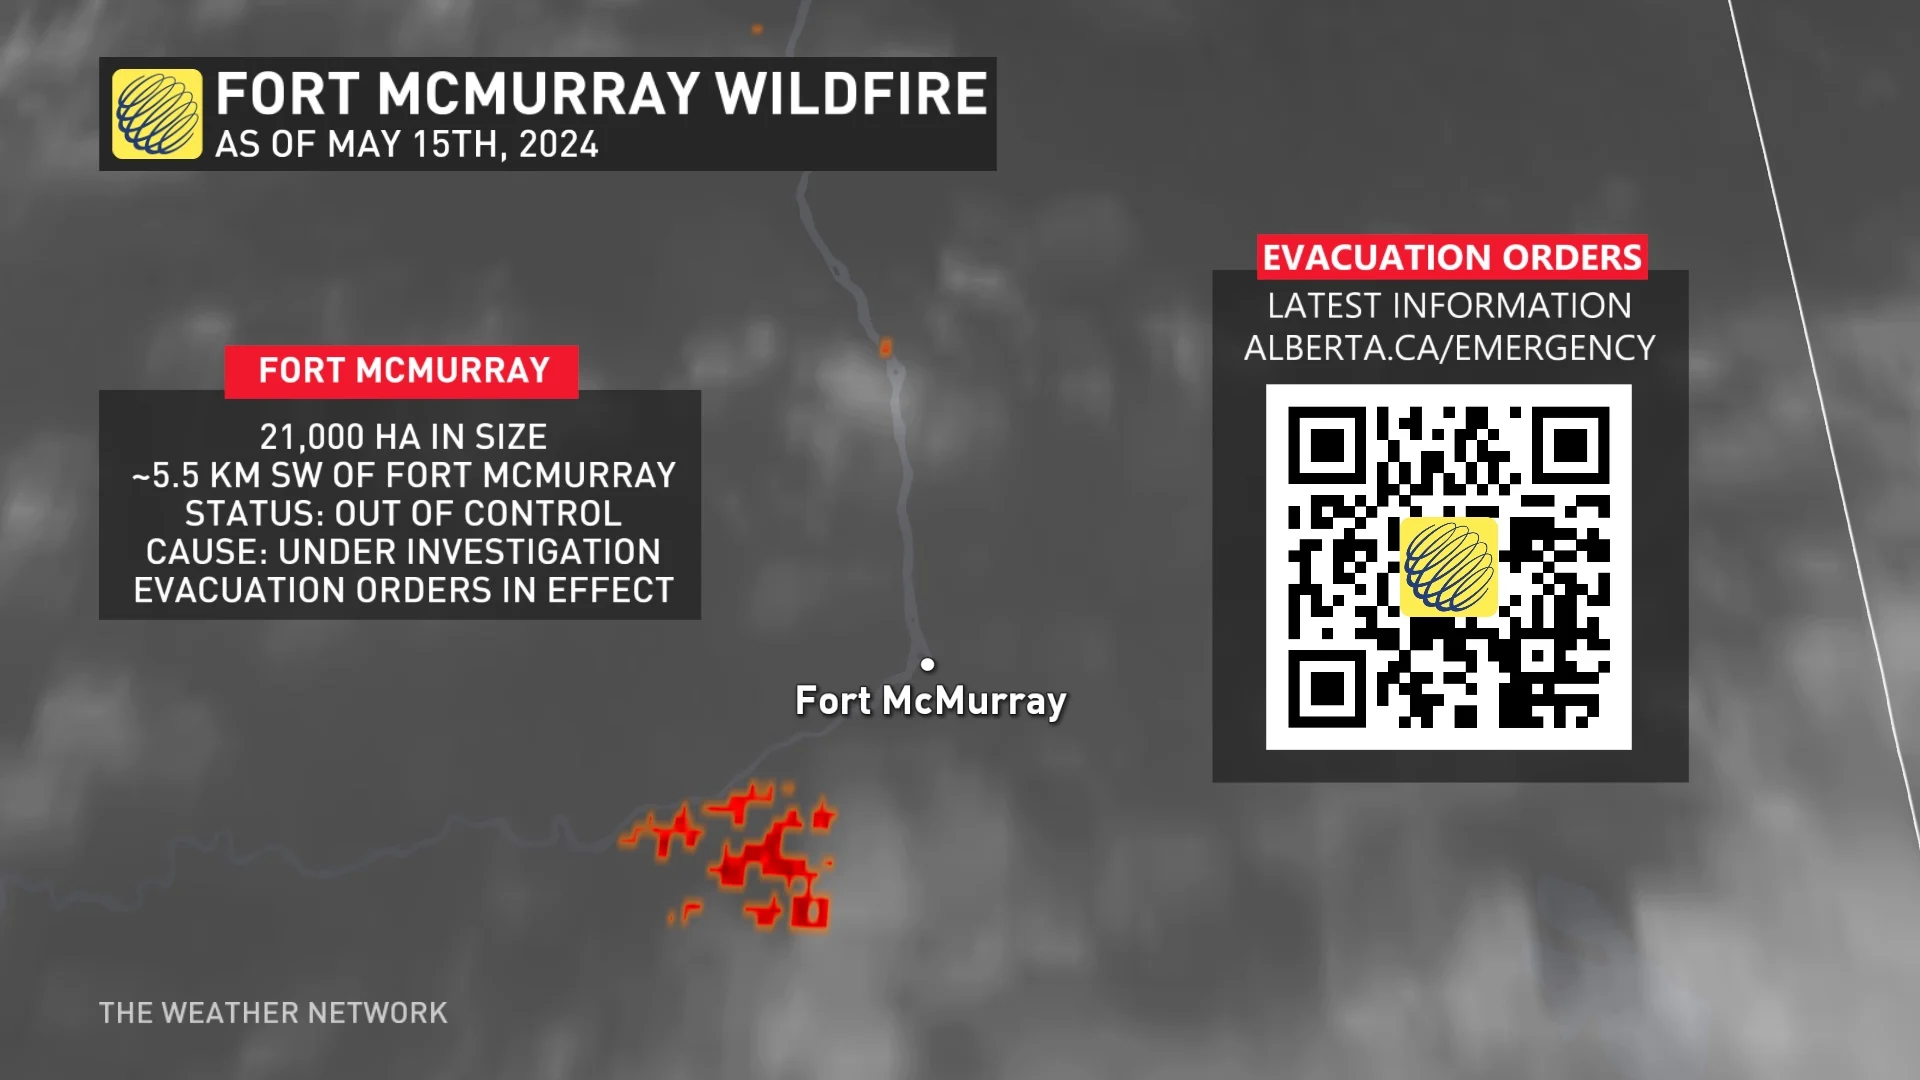 May 15 (4 pm update): Fort McMurray, Alberta wildfire update (The Weather Network)